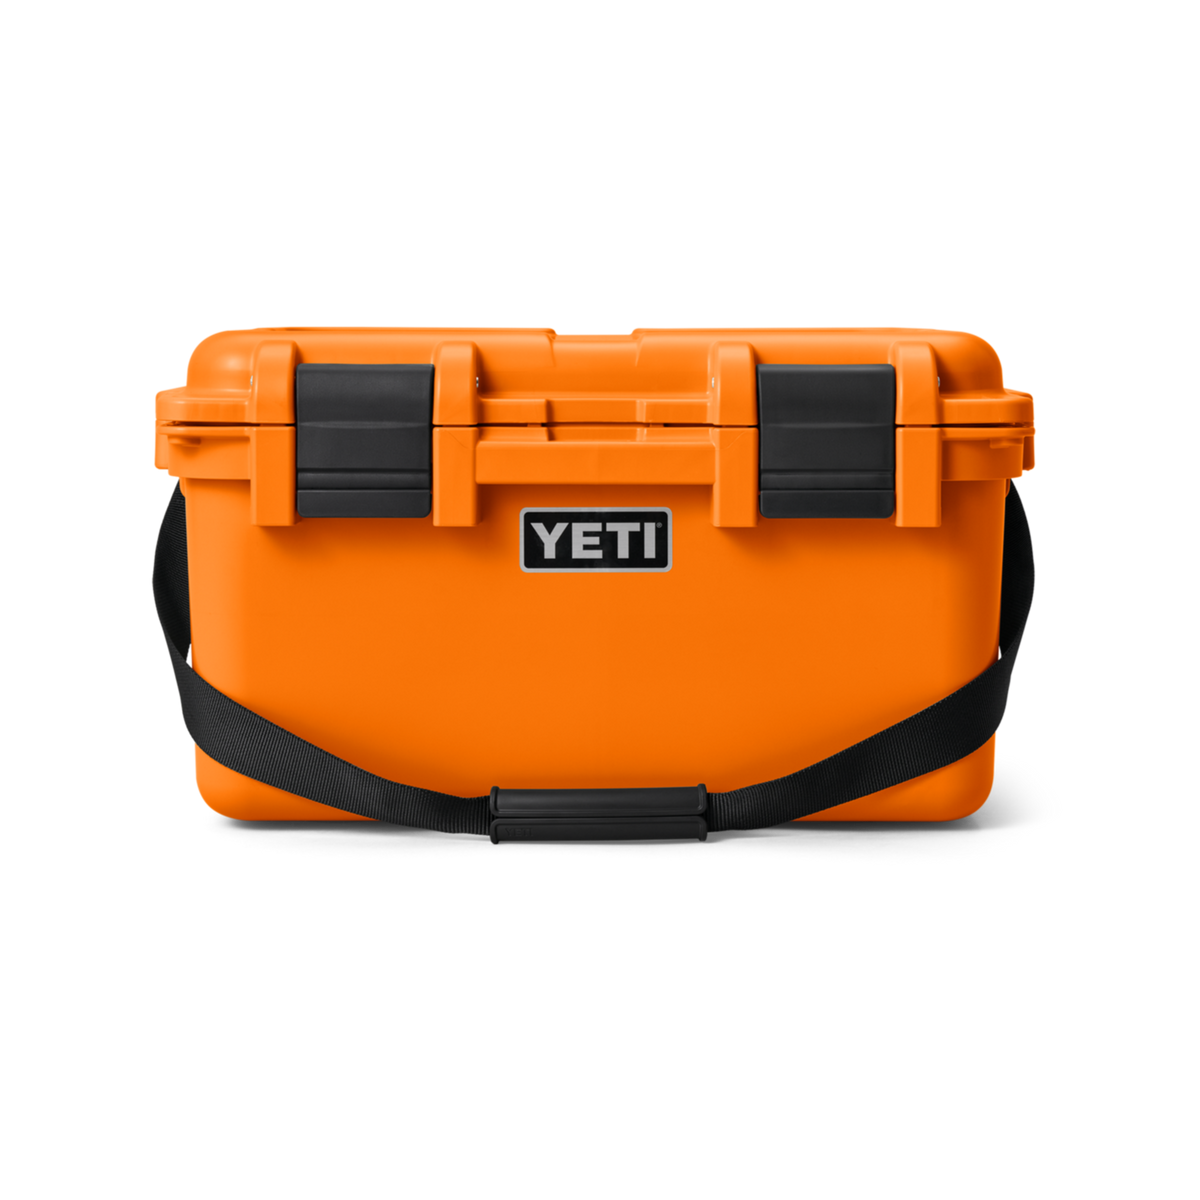 YETI LoadOut GoBox 30: The Brand's All-New Indestructible Storage